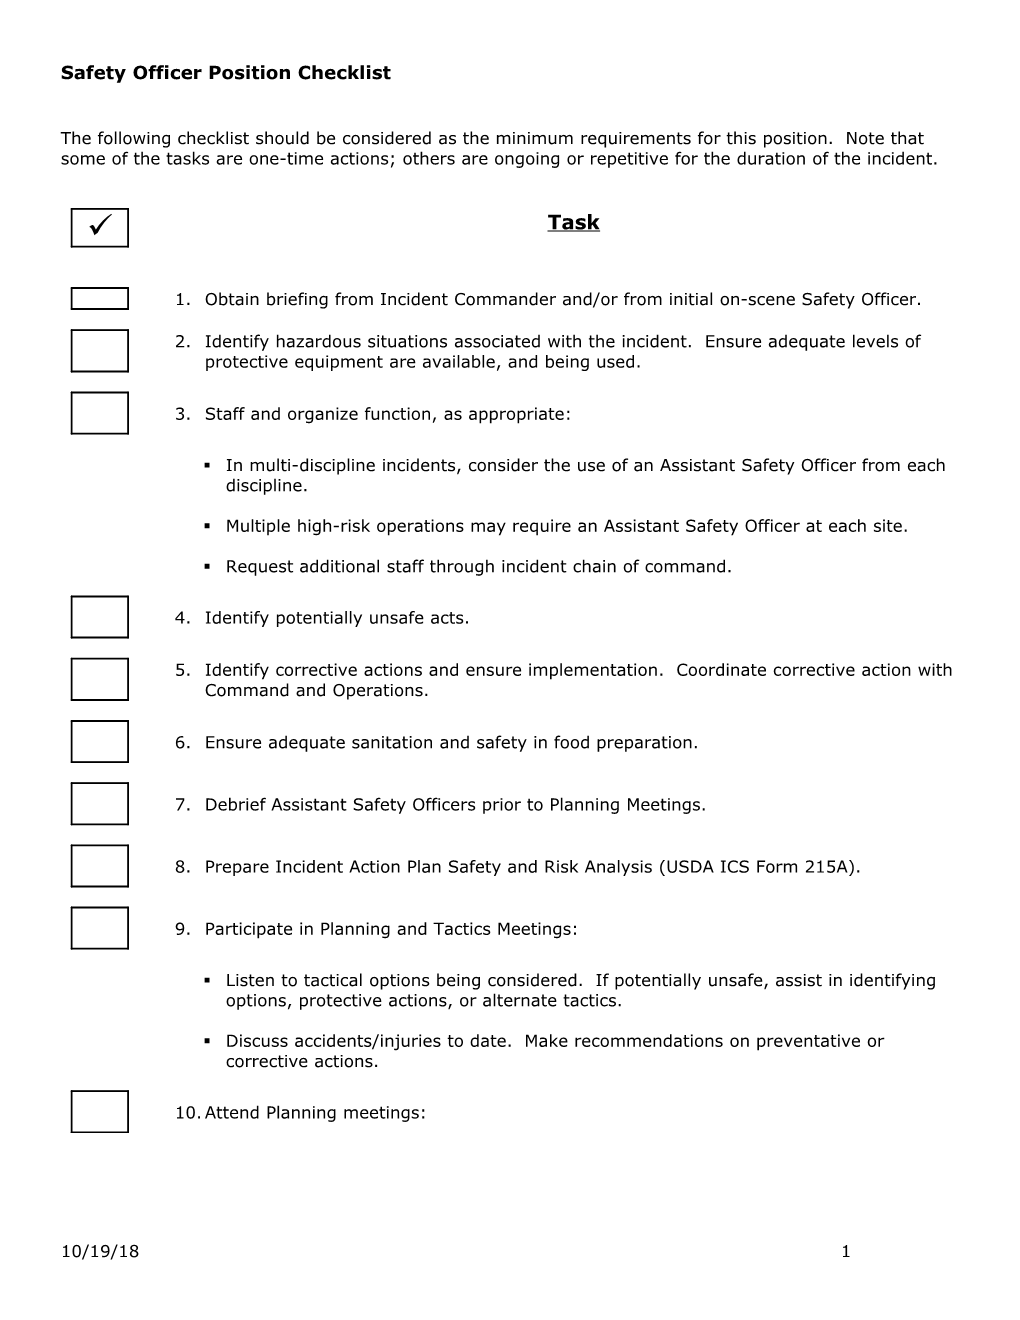 Safety Officer Position Checklist